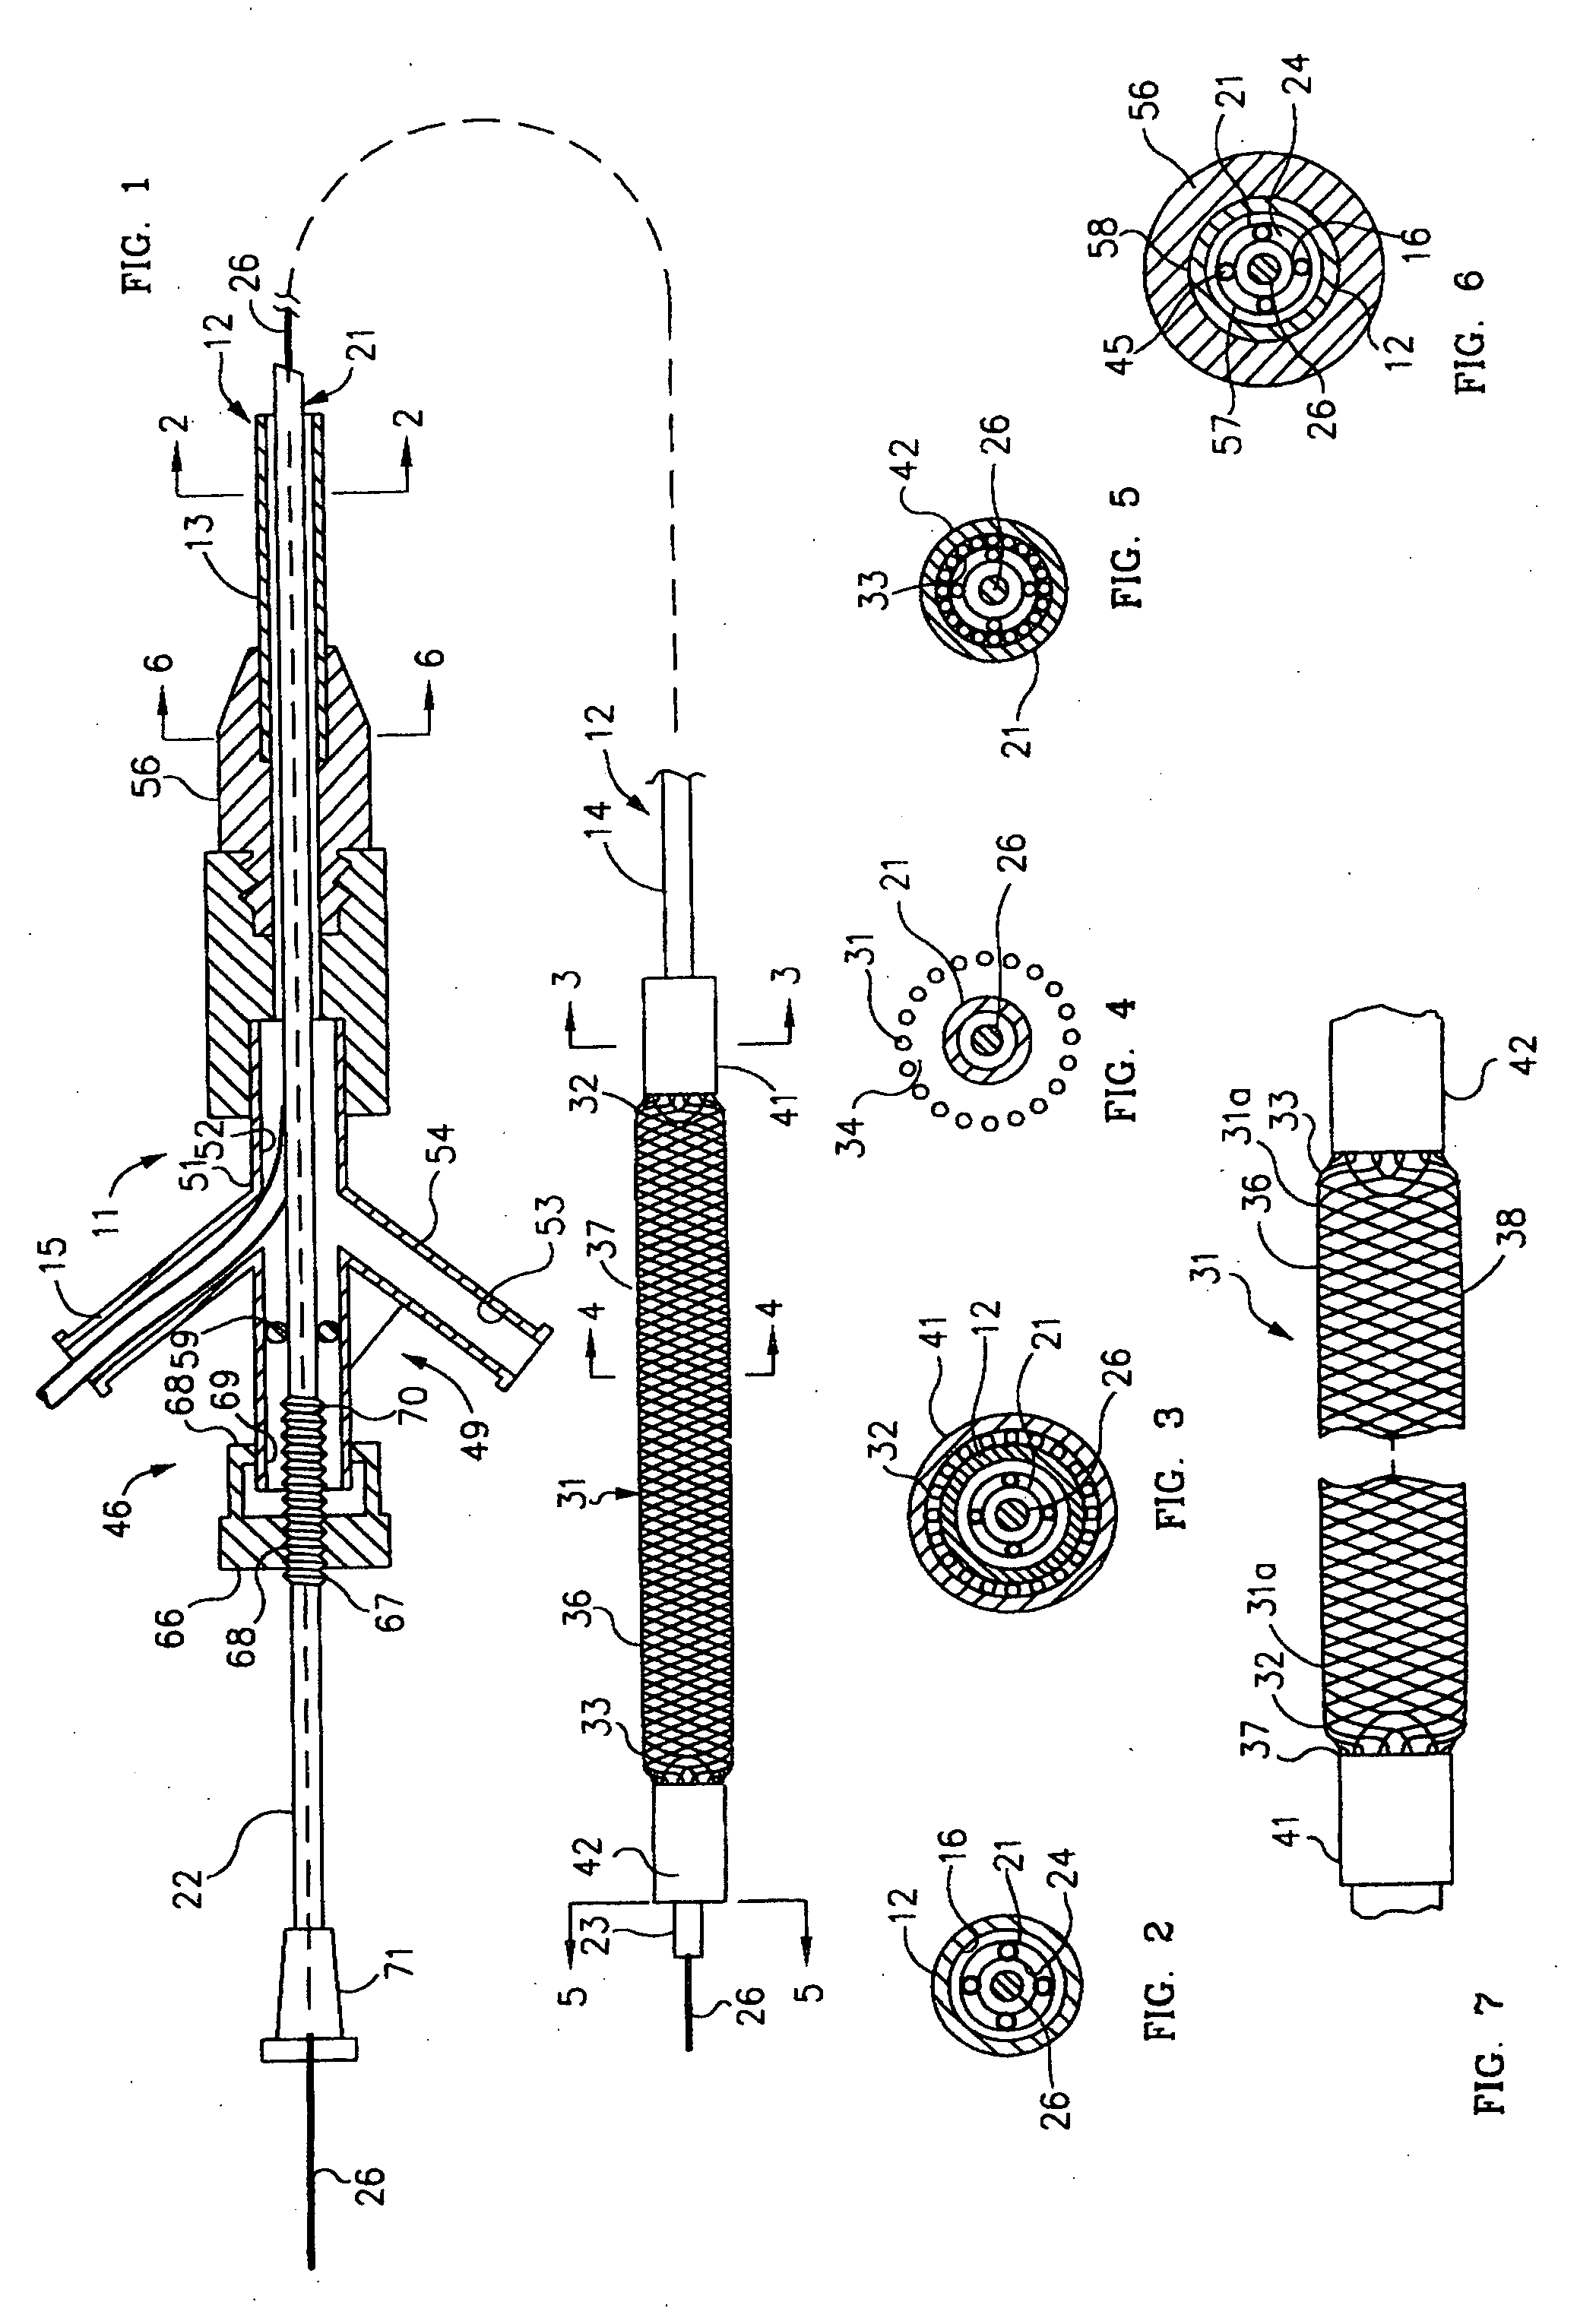 Mechanical apparatus and method for dilating and delivering a therapeutic agent to a site of treatment